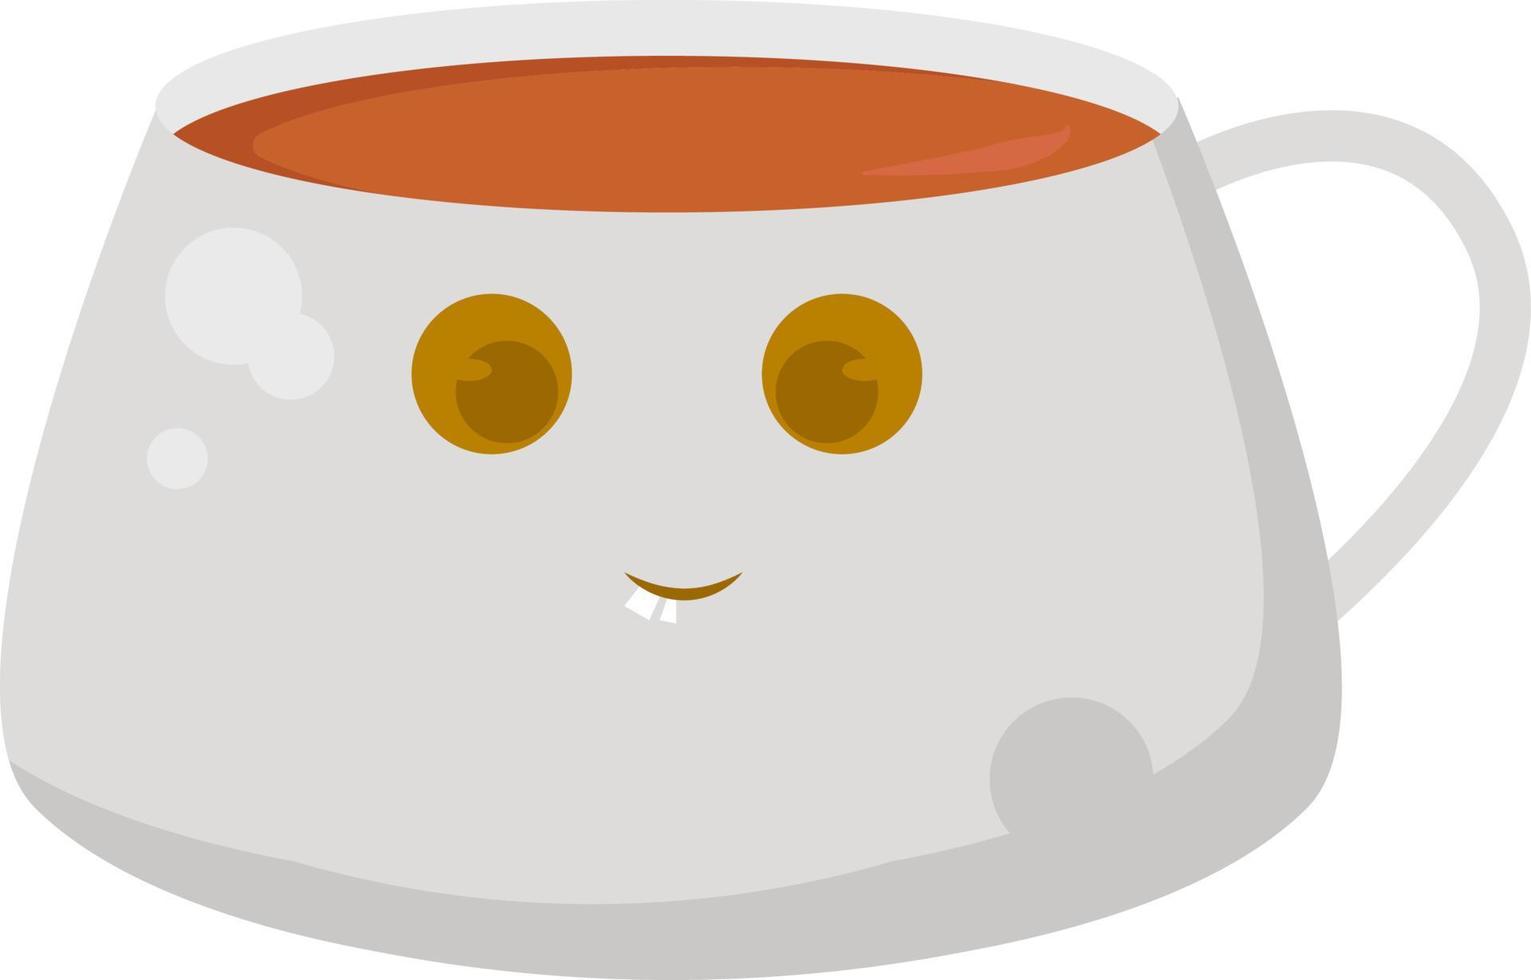 Tea in cup, illustration, vector on white background.